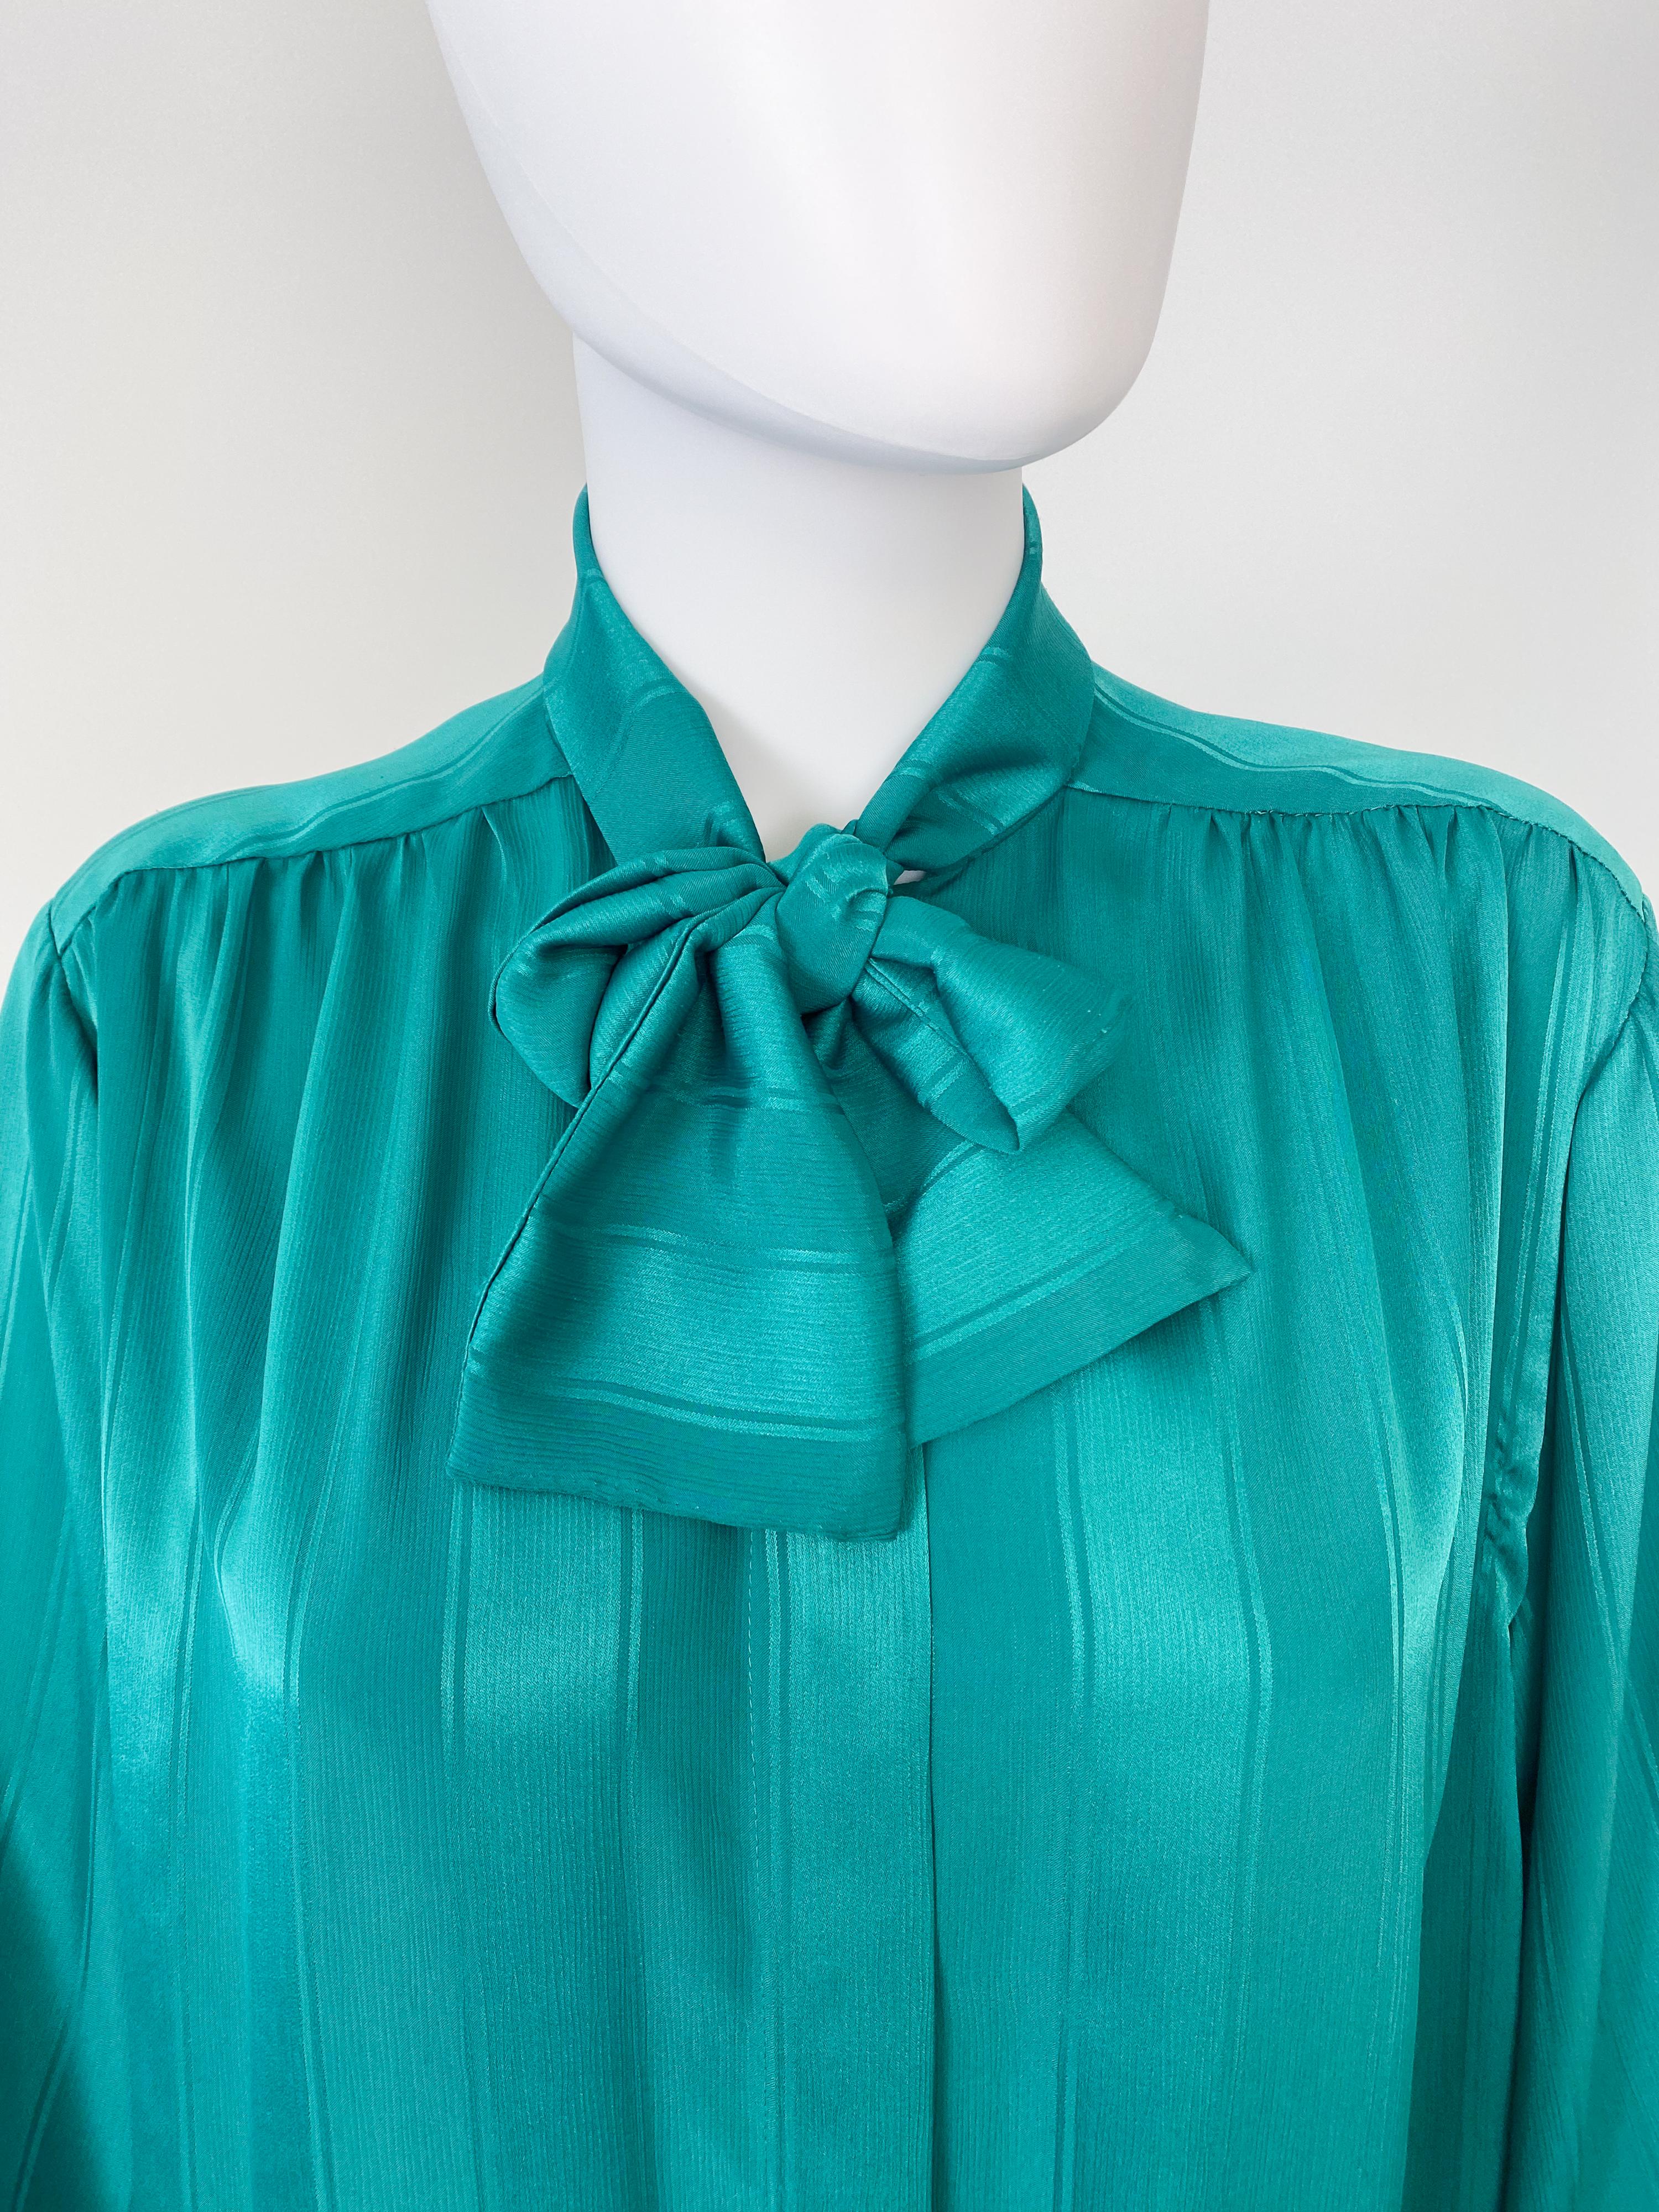 Women's Vintage 1980s Silky Polyester Bow Blouse Top Emerald Green Stripes Size 12/14 For Sale